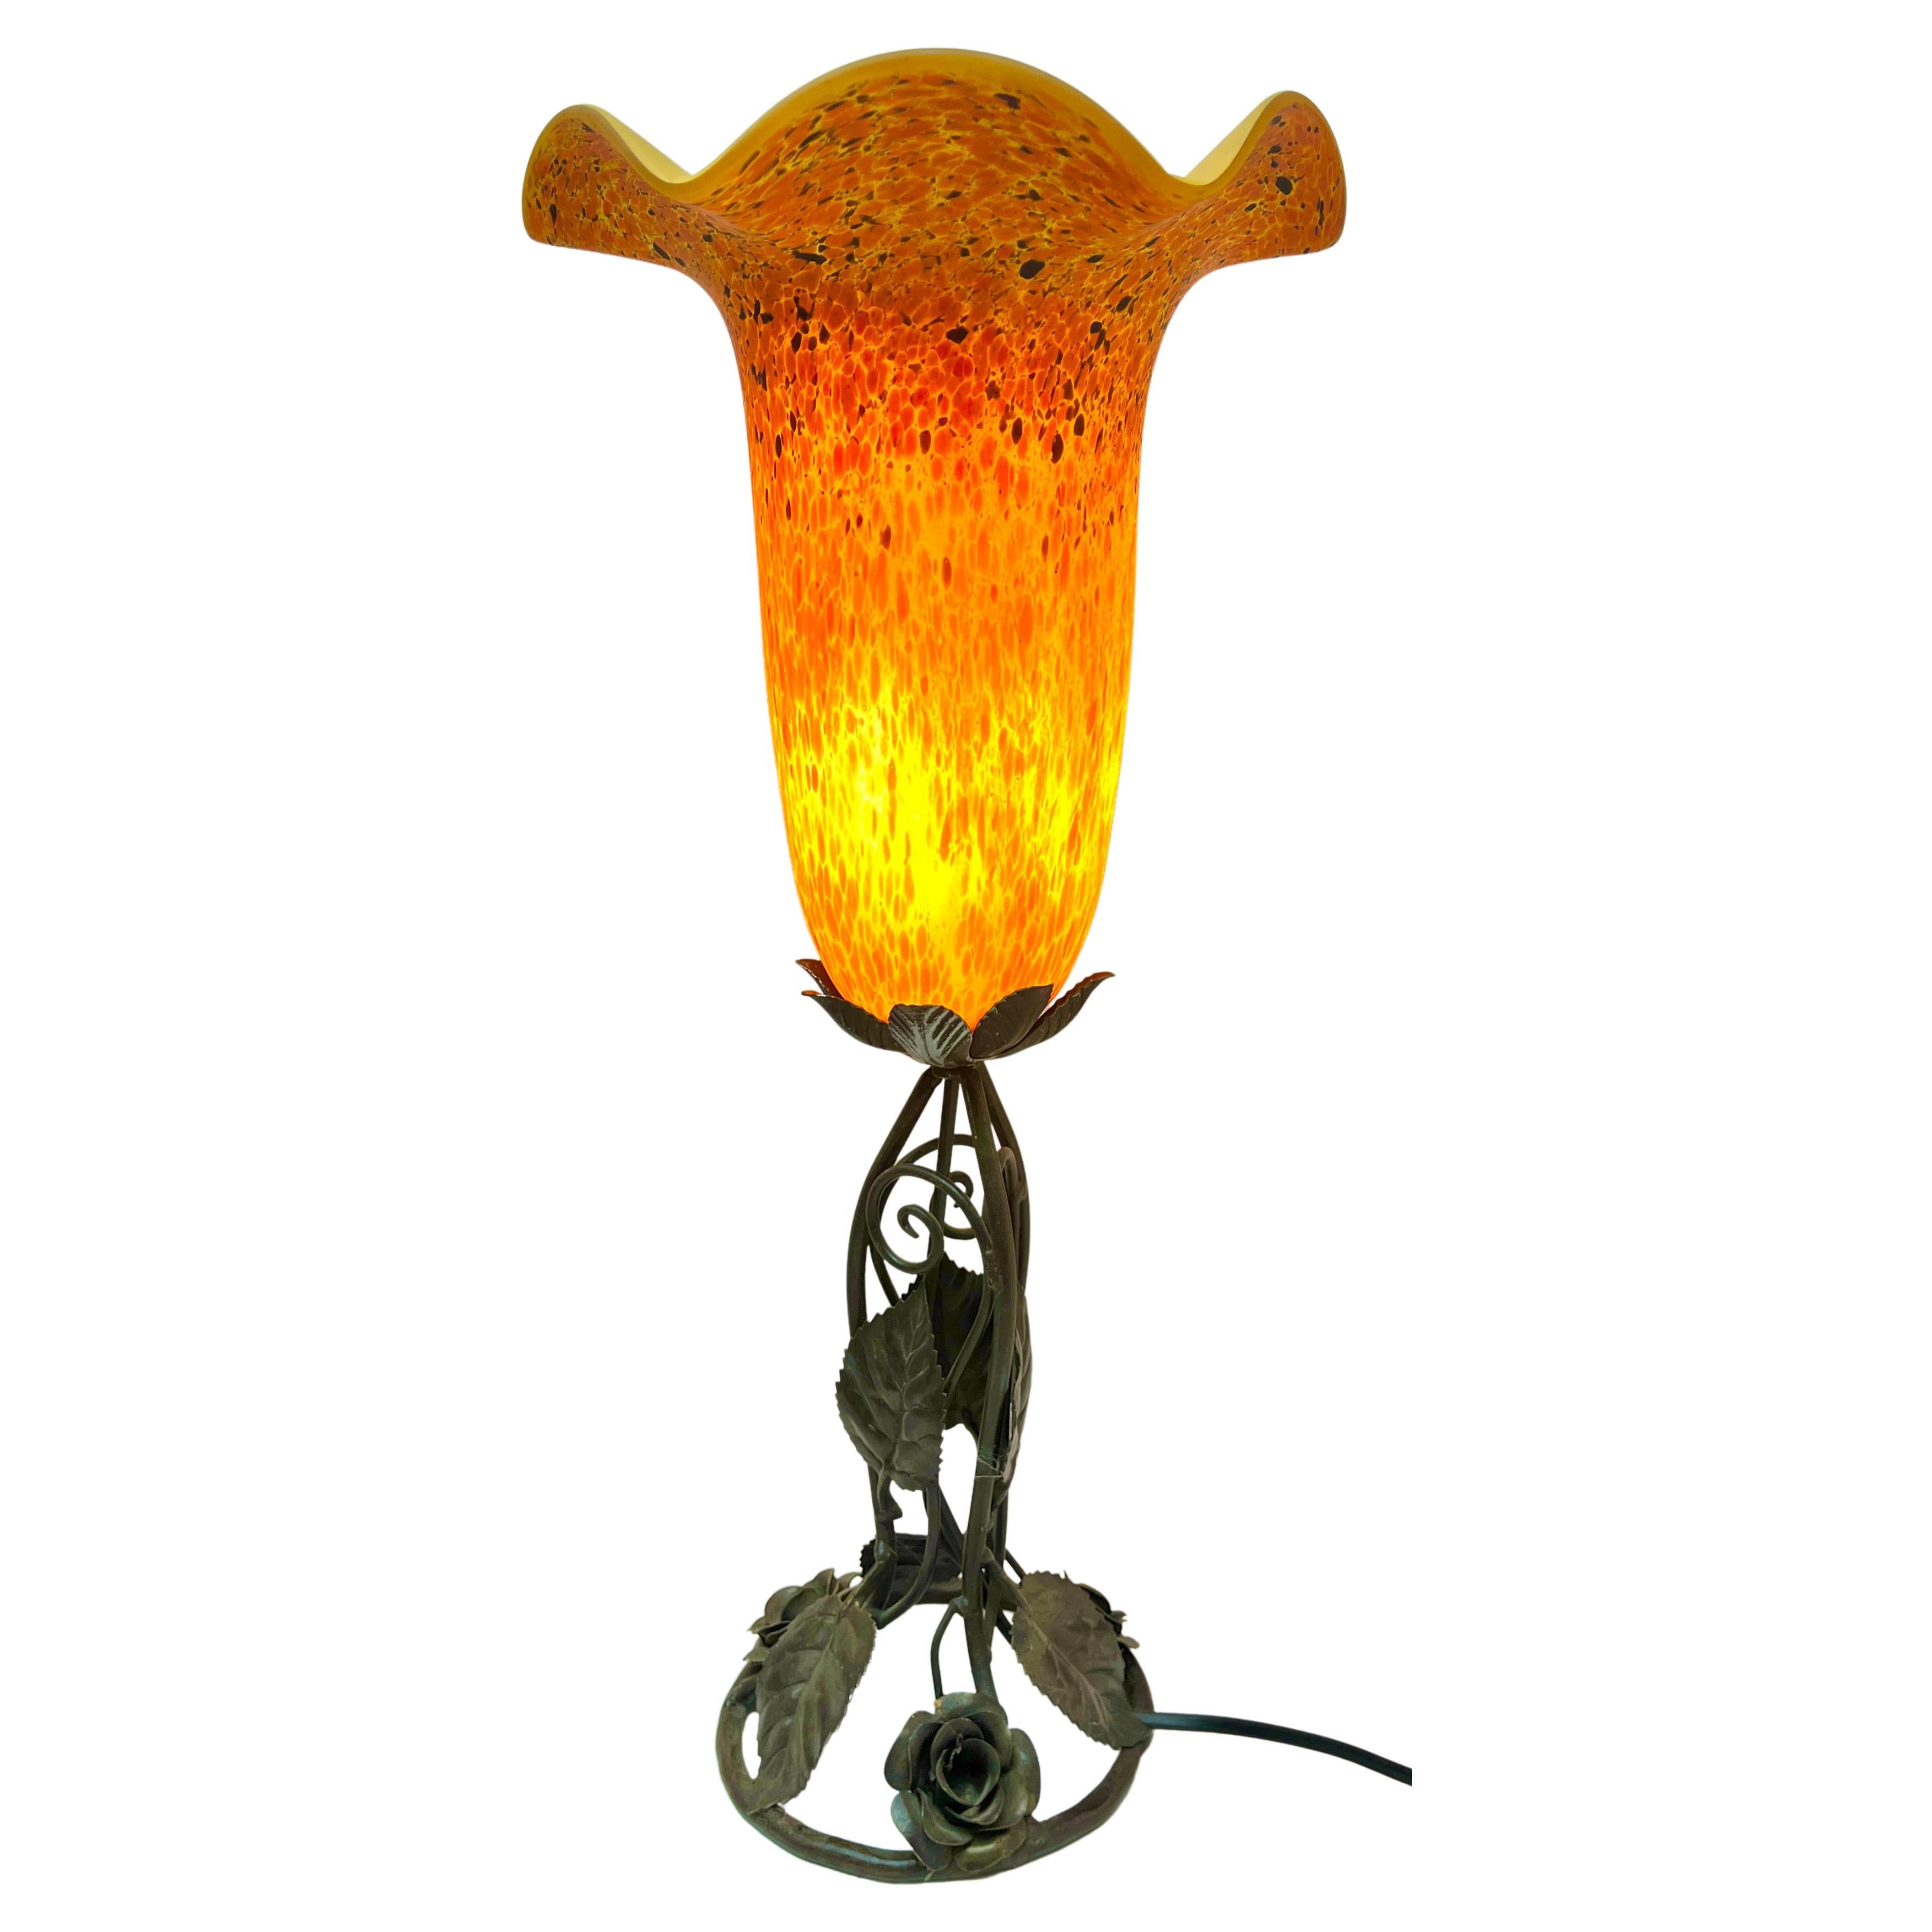 French Art Nouveau Lamp in Wrought Iron with Glass Shade, 1920s